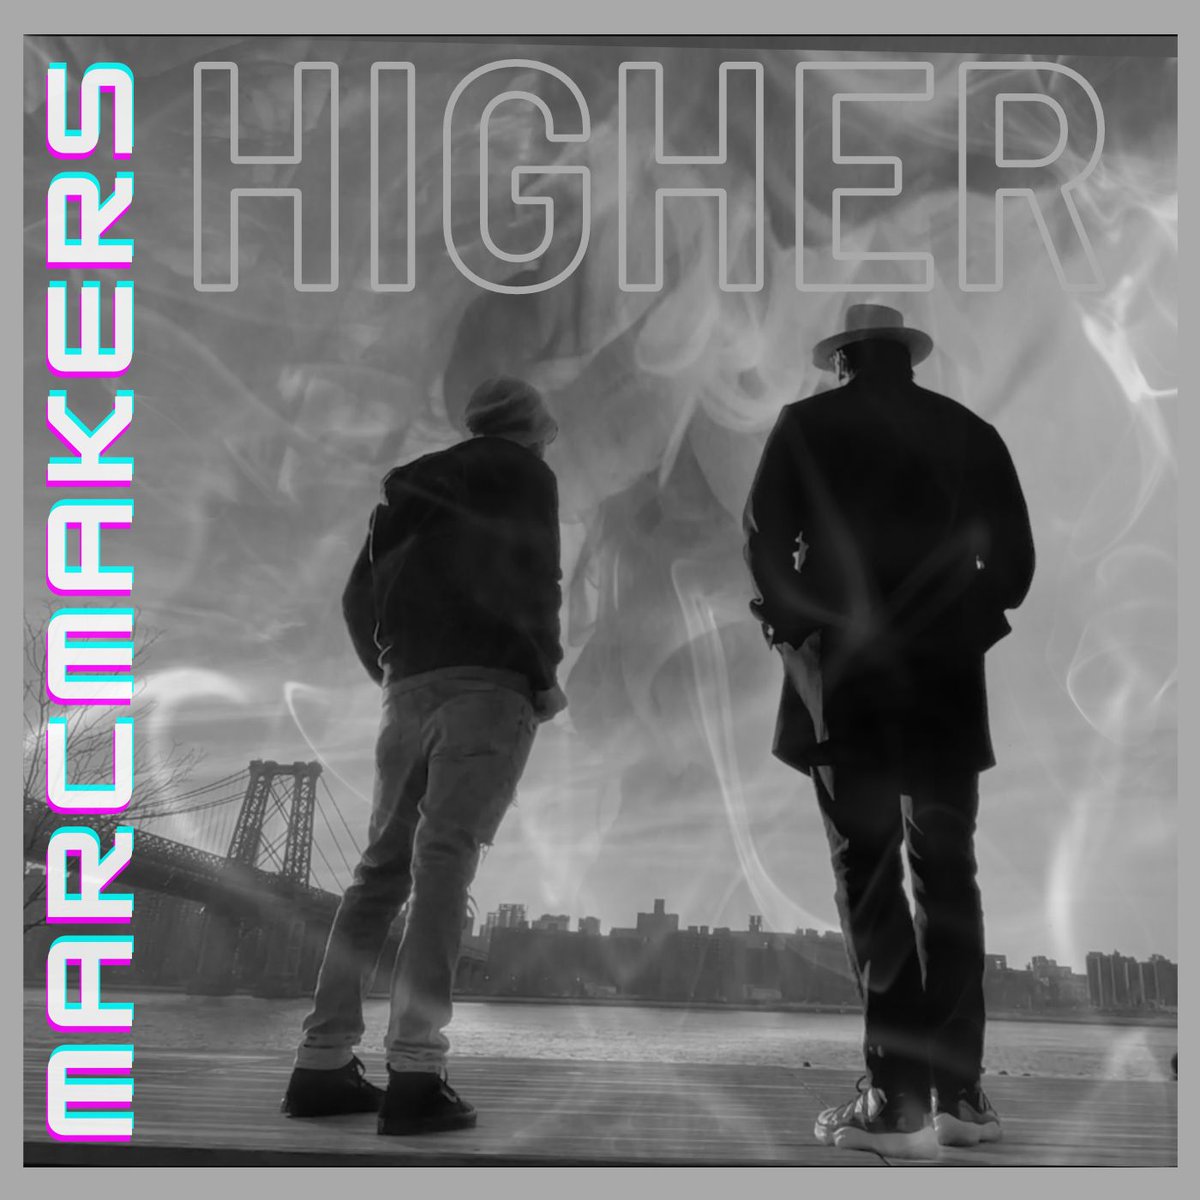 Available on All platforms. All official Links in Bio! #MarcMakers #Higher #Pop #PopMusic